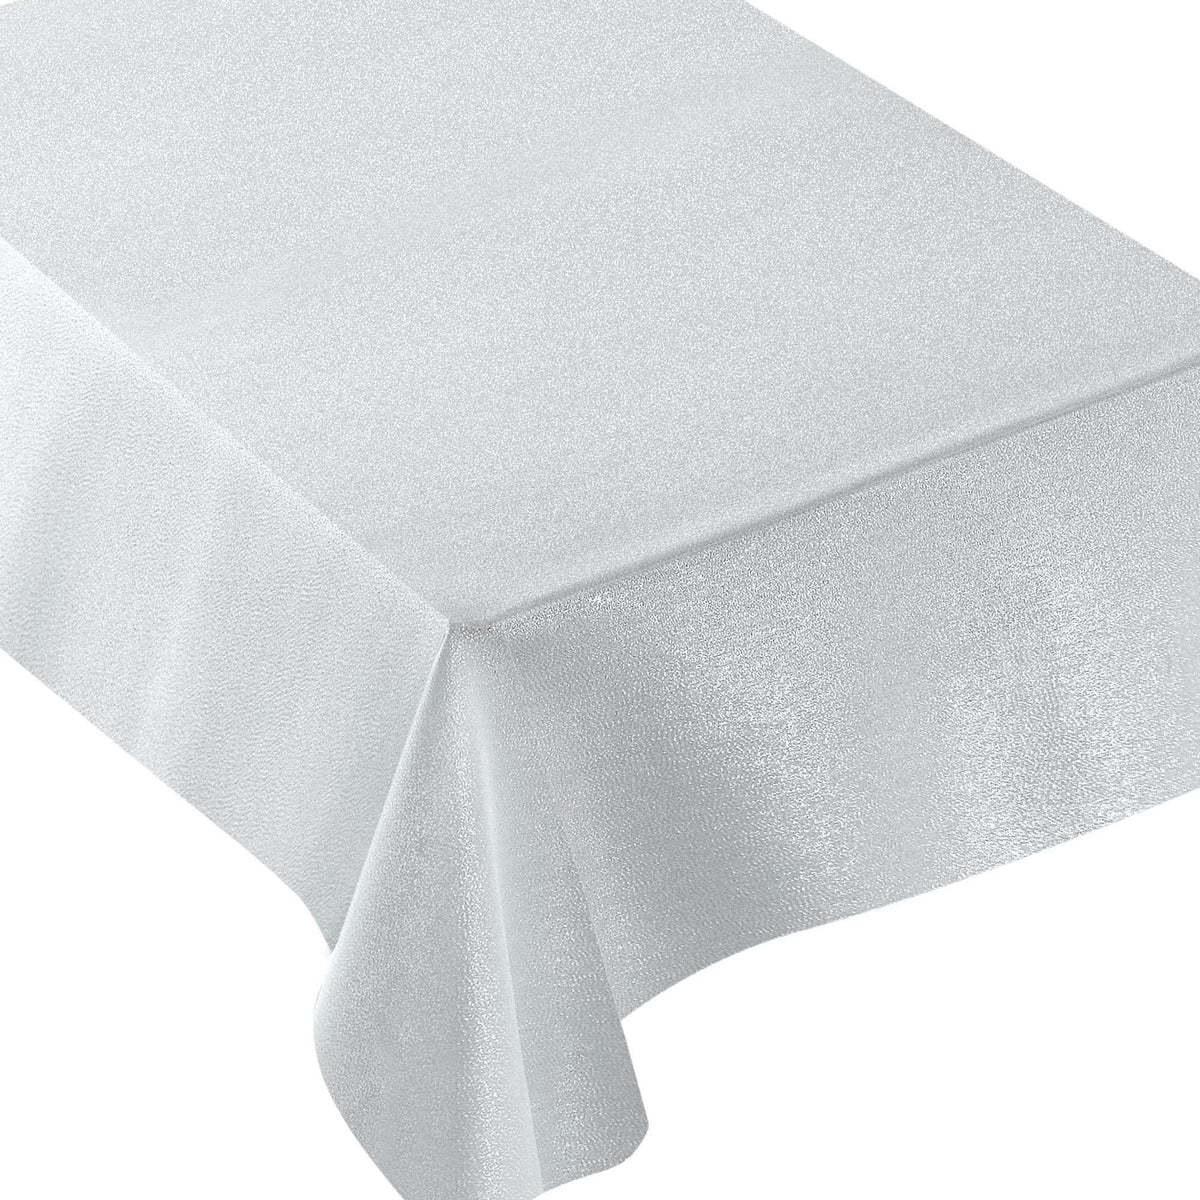 AMSCAN CA Disposable-Plasticware Metallic Rectangular Tablecloth, White and Silver, 60 x 84 Inches, 1 Count